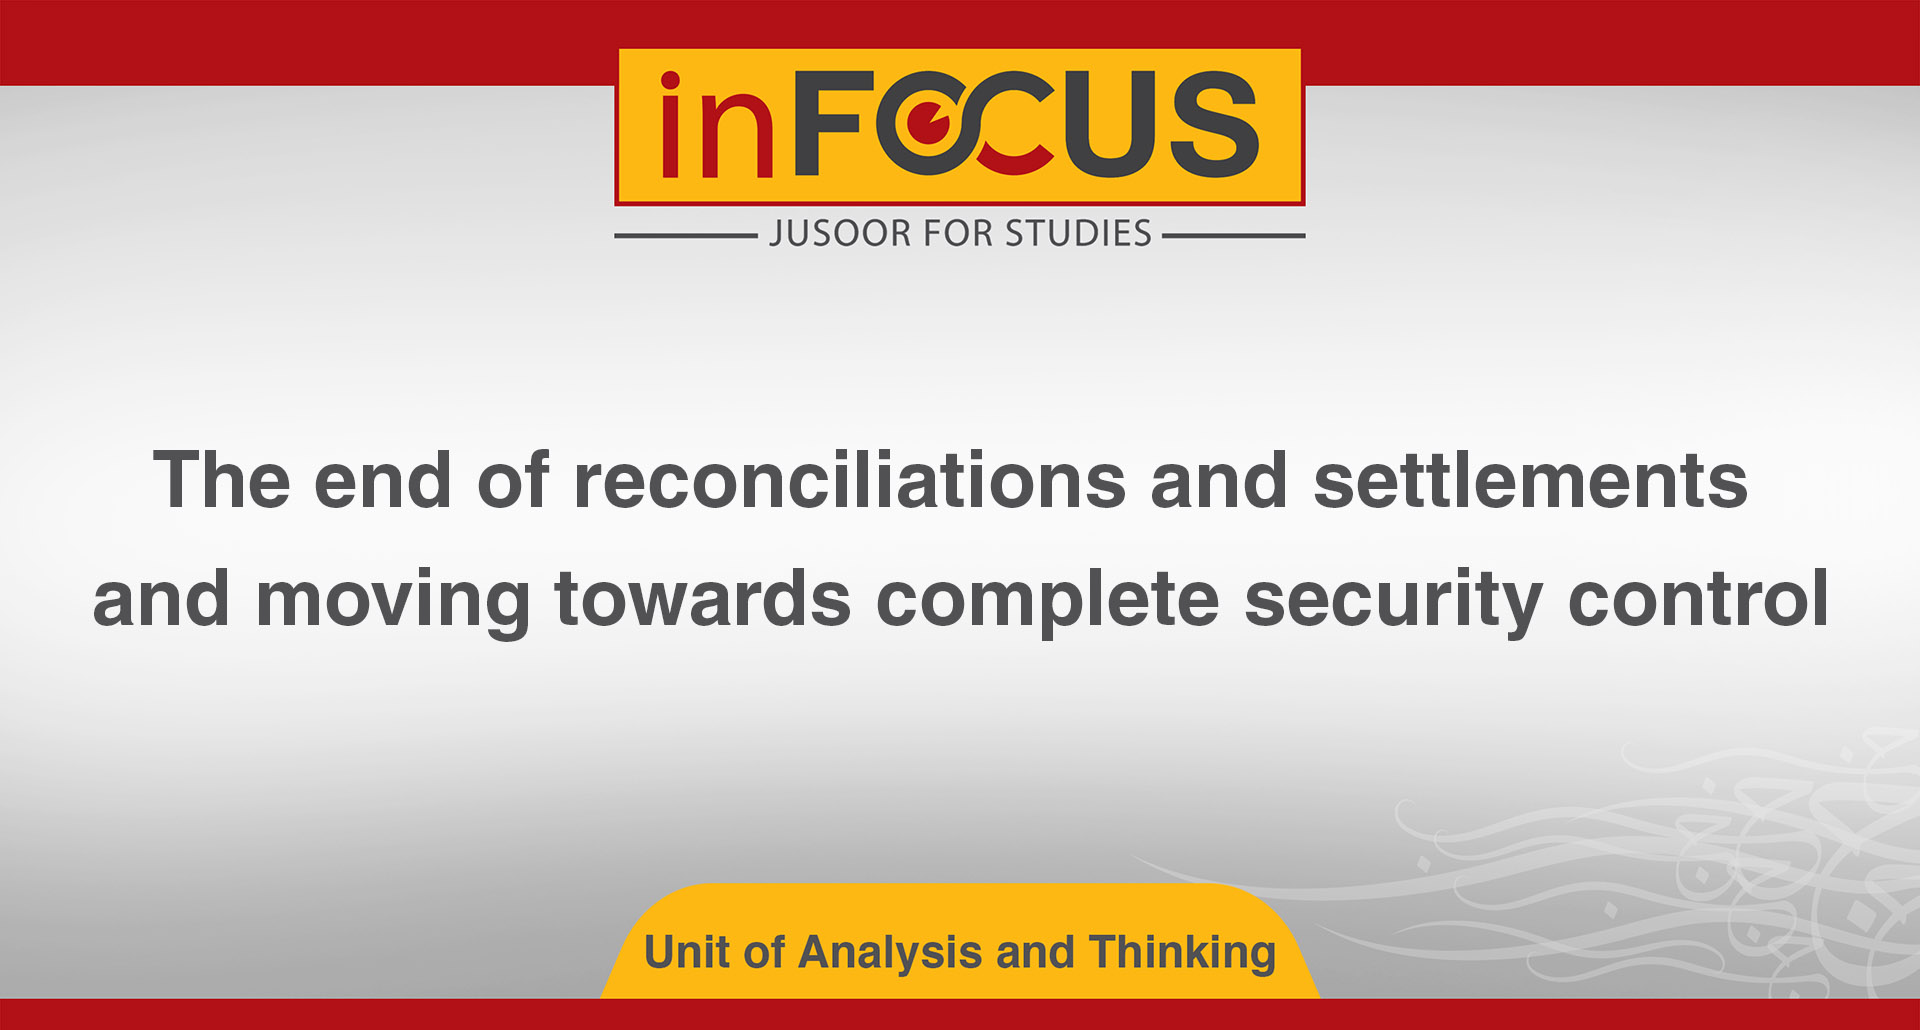 The end of reconciliations and settlements and moving towards complete security control